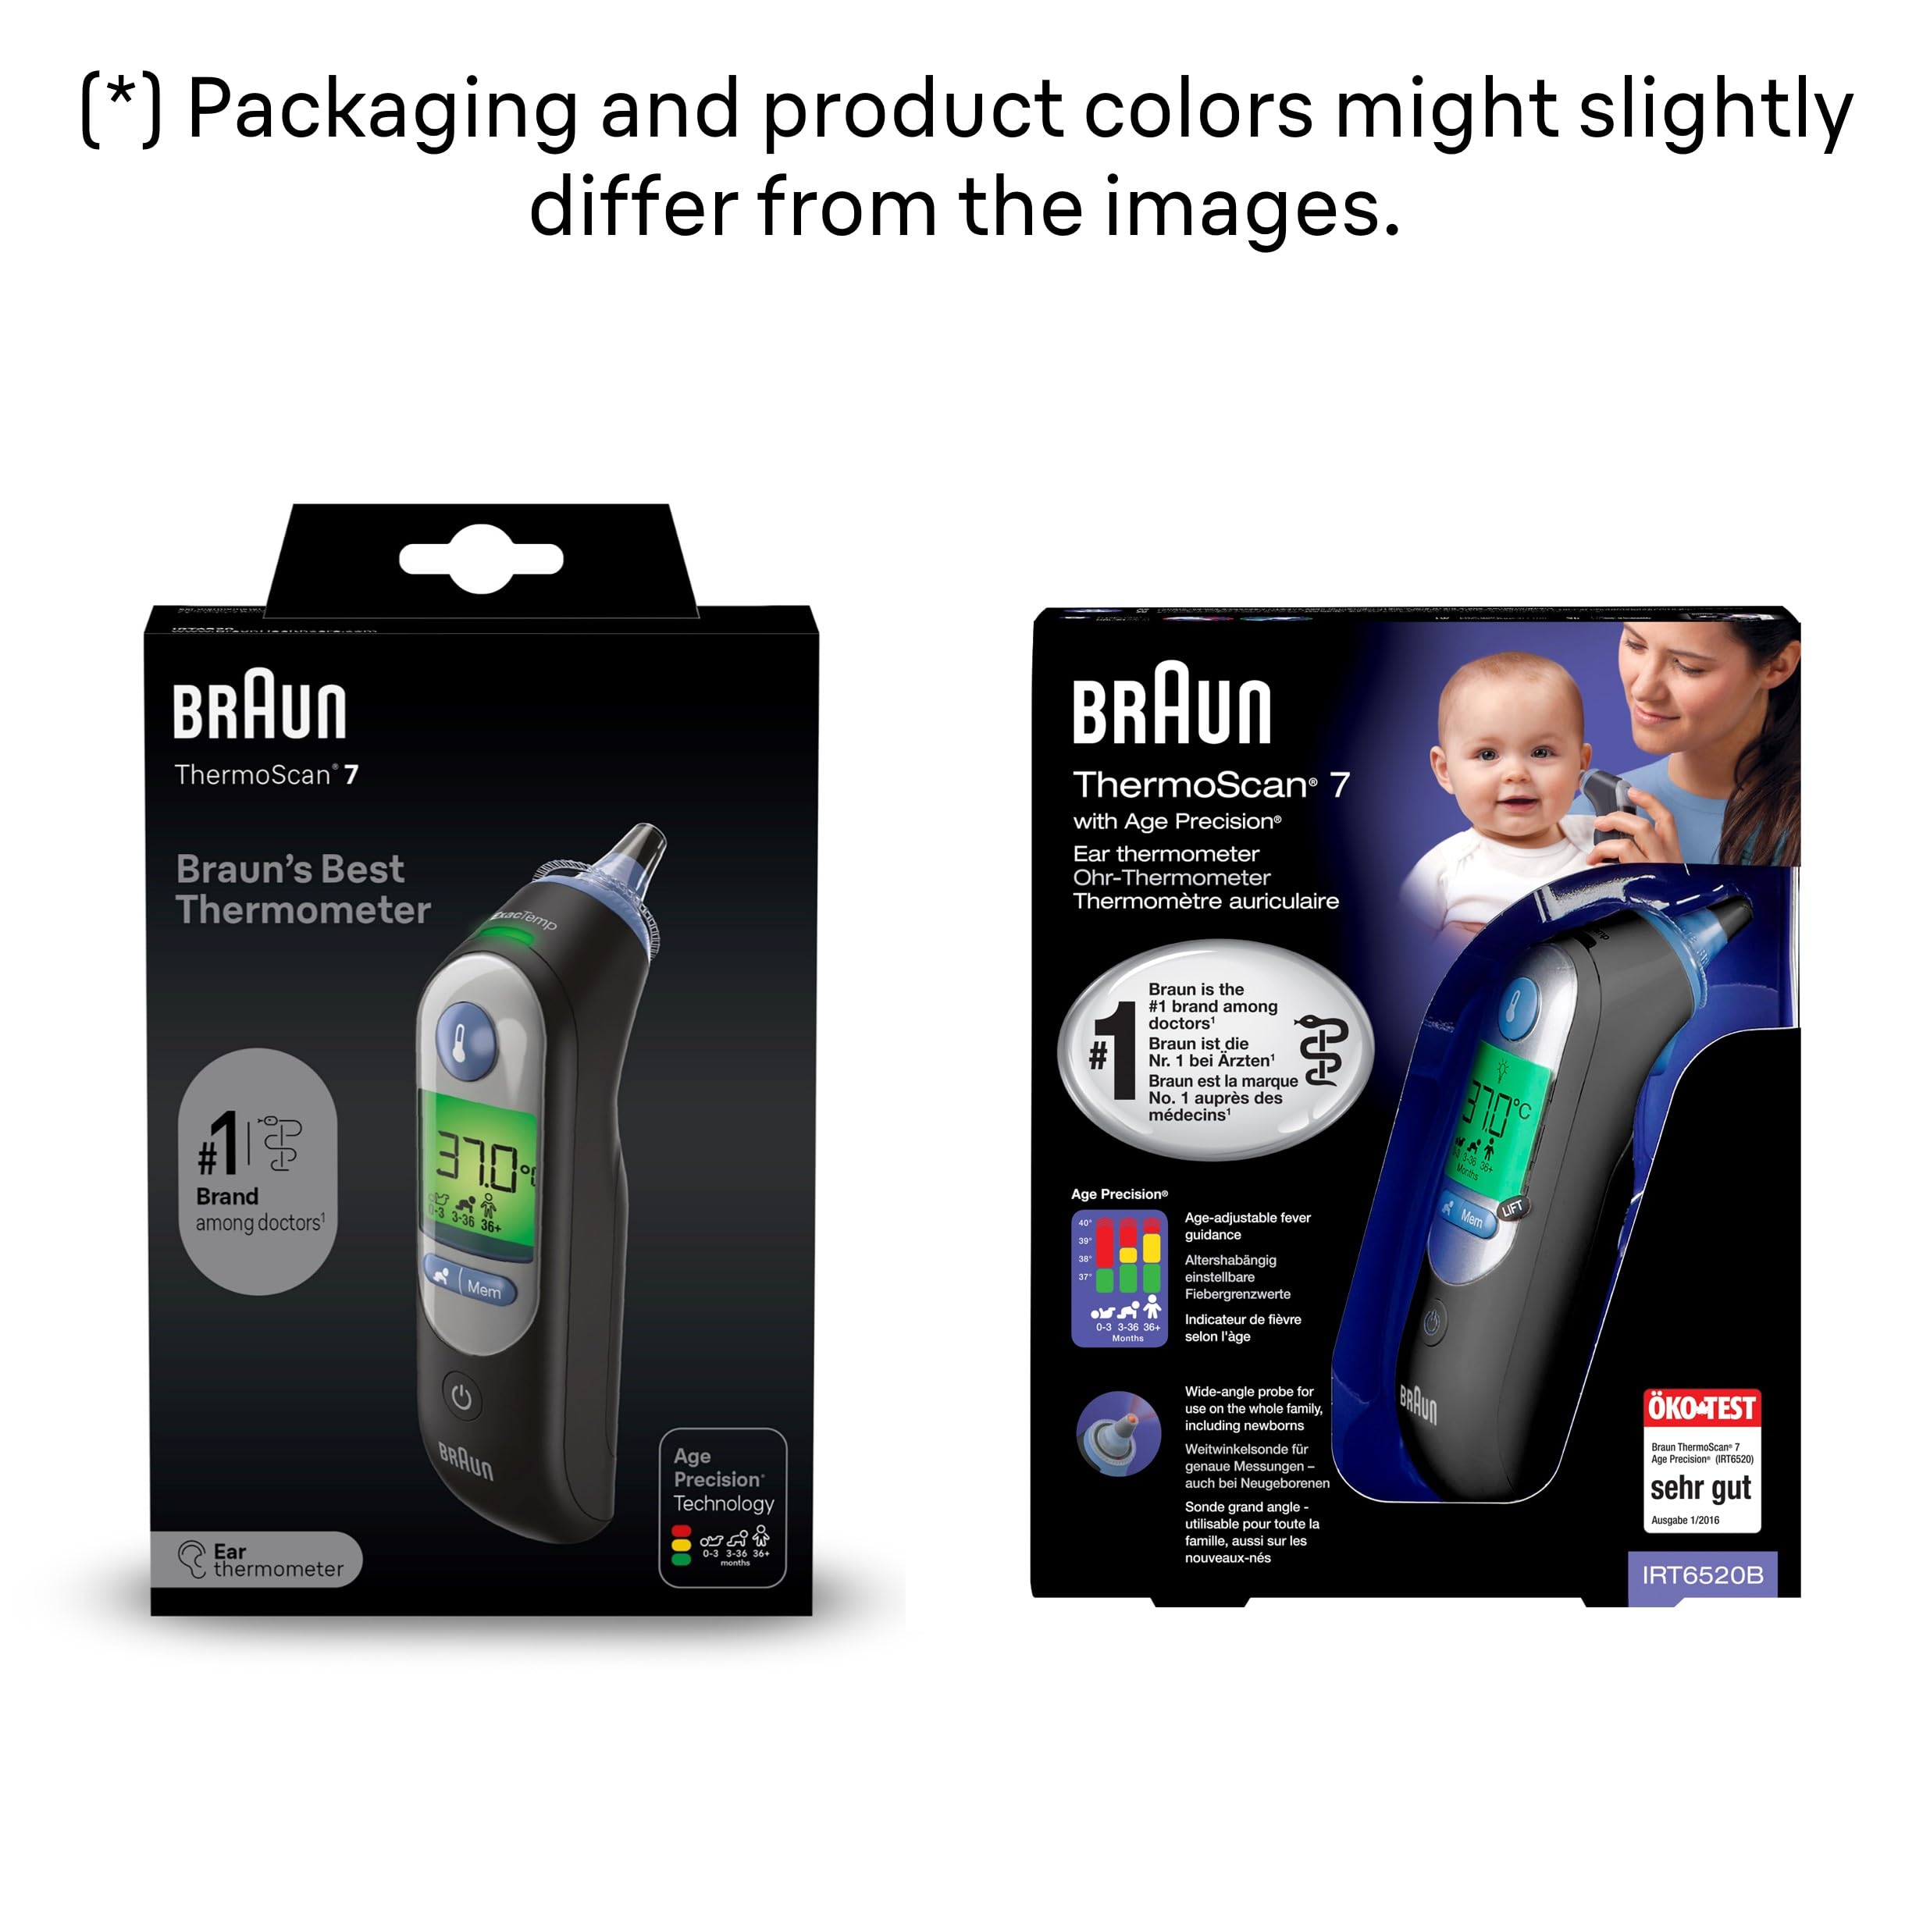 Braun ThermoScan 7 Ear thermometer   Age Precision Technology   Digital Display   Baby and Infant Friendly   No.1 Brand Among Doctors1